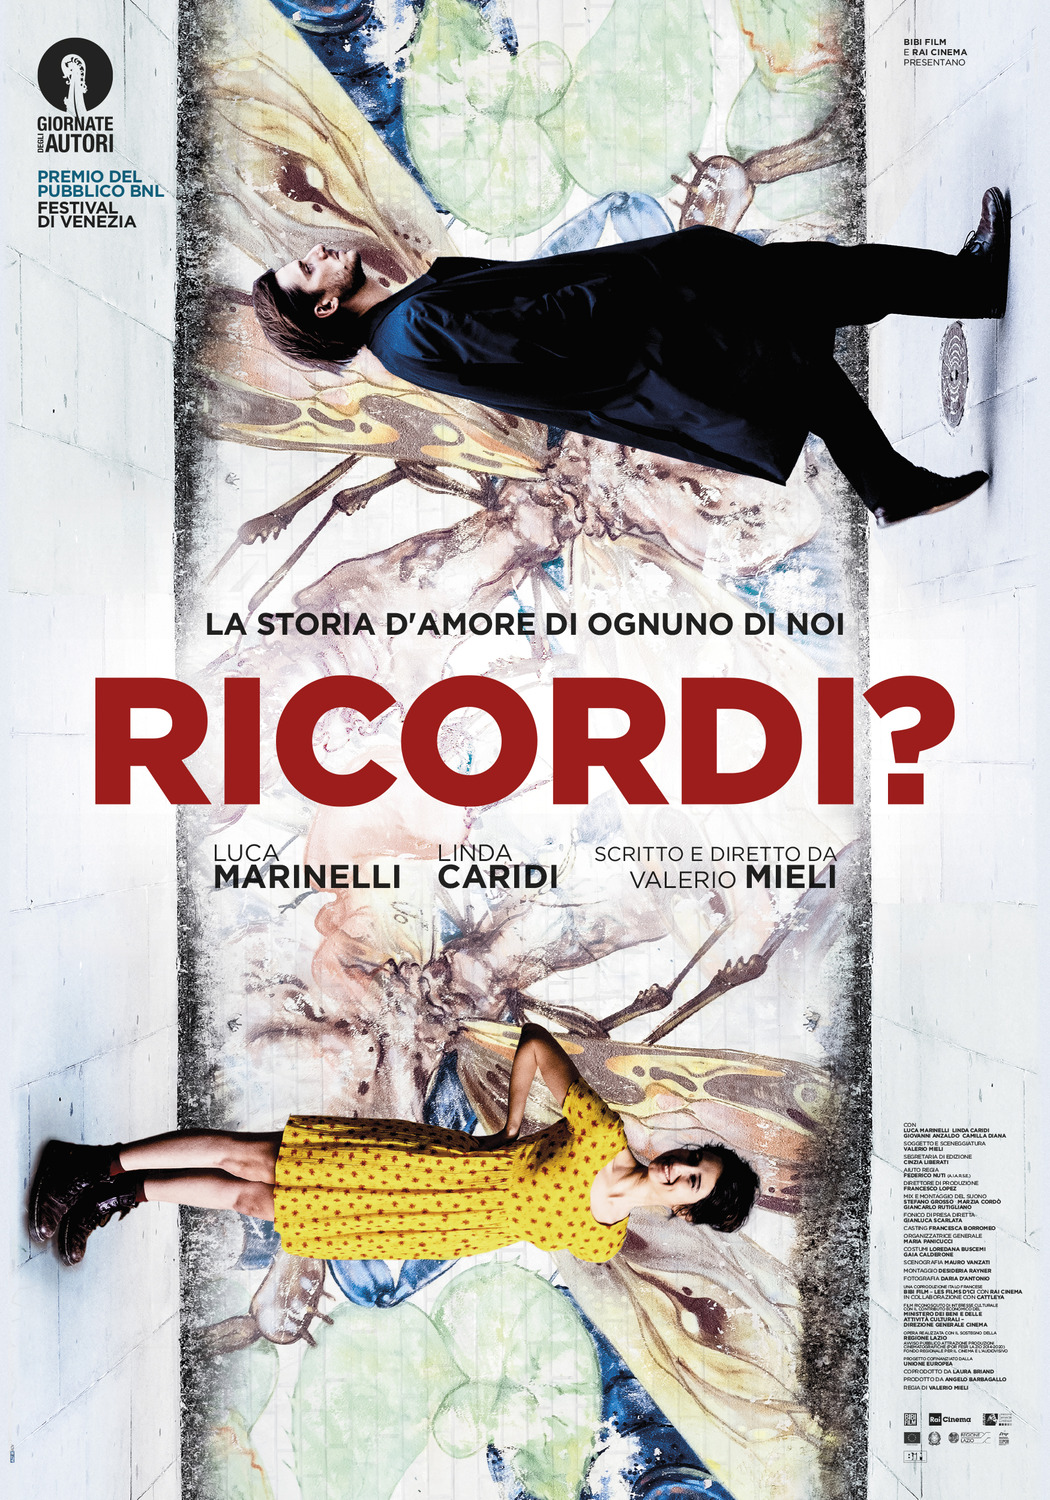 Extra Large Movie Poster Image for Ricordi? 